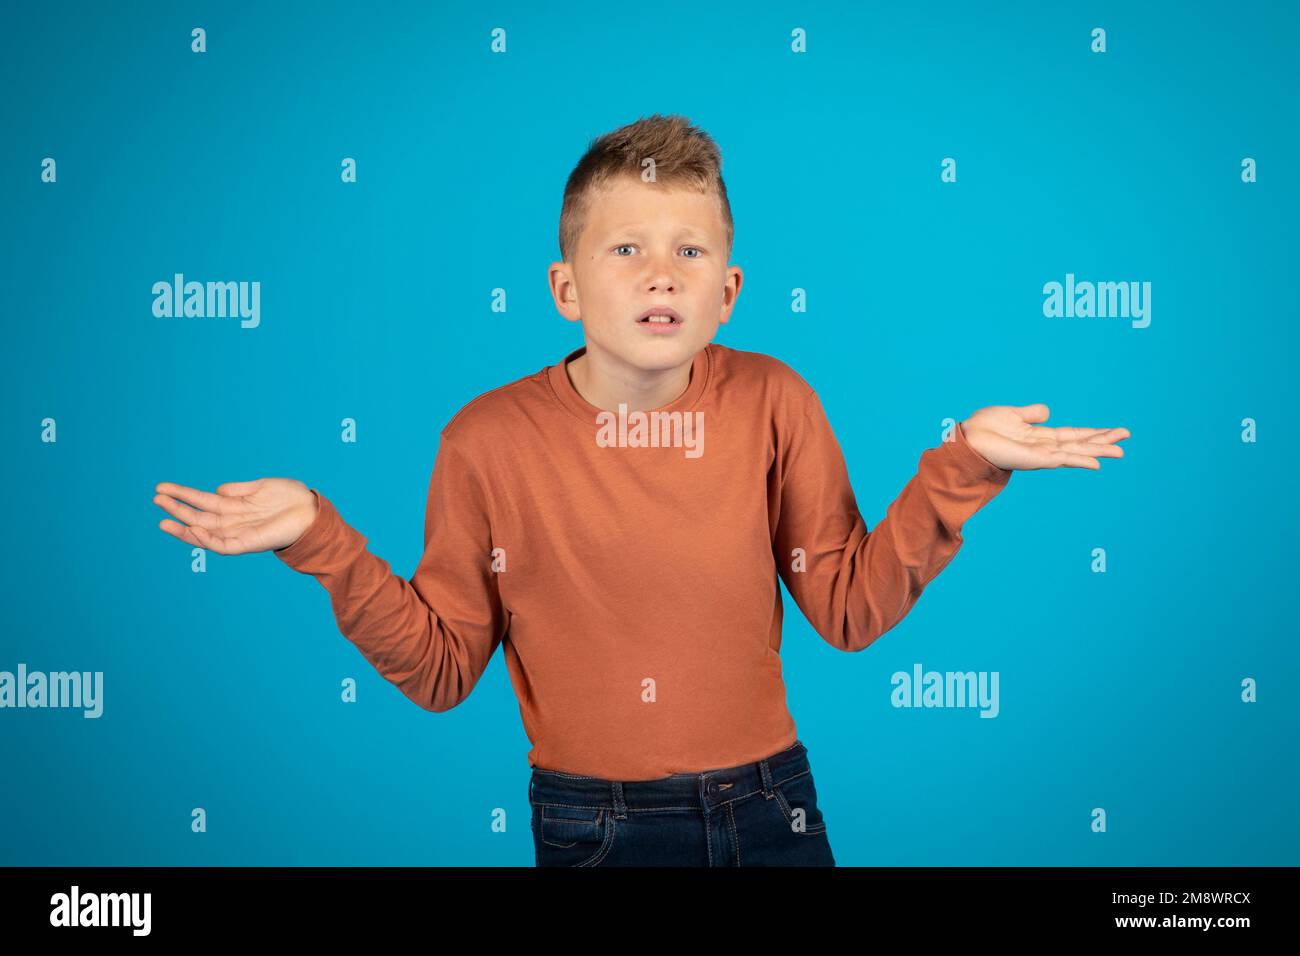 I Don't Know. Doubtful Preteen Boy Shrugging Shoulders And Spreading Arms Stock Photo